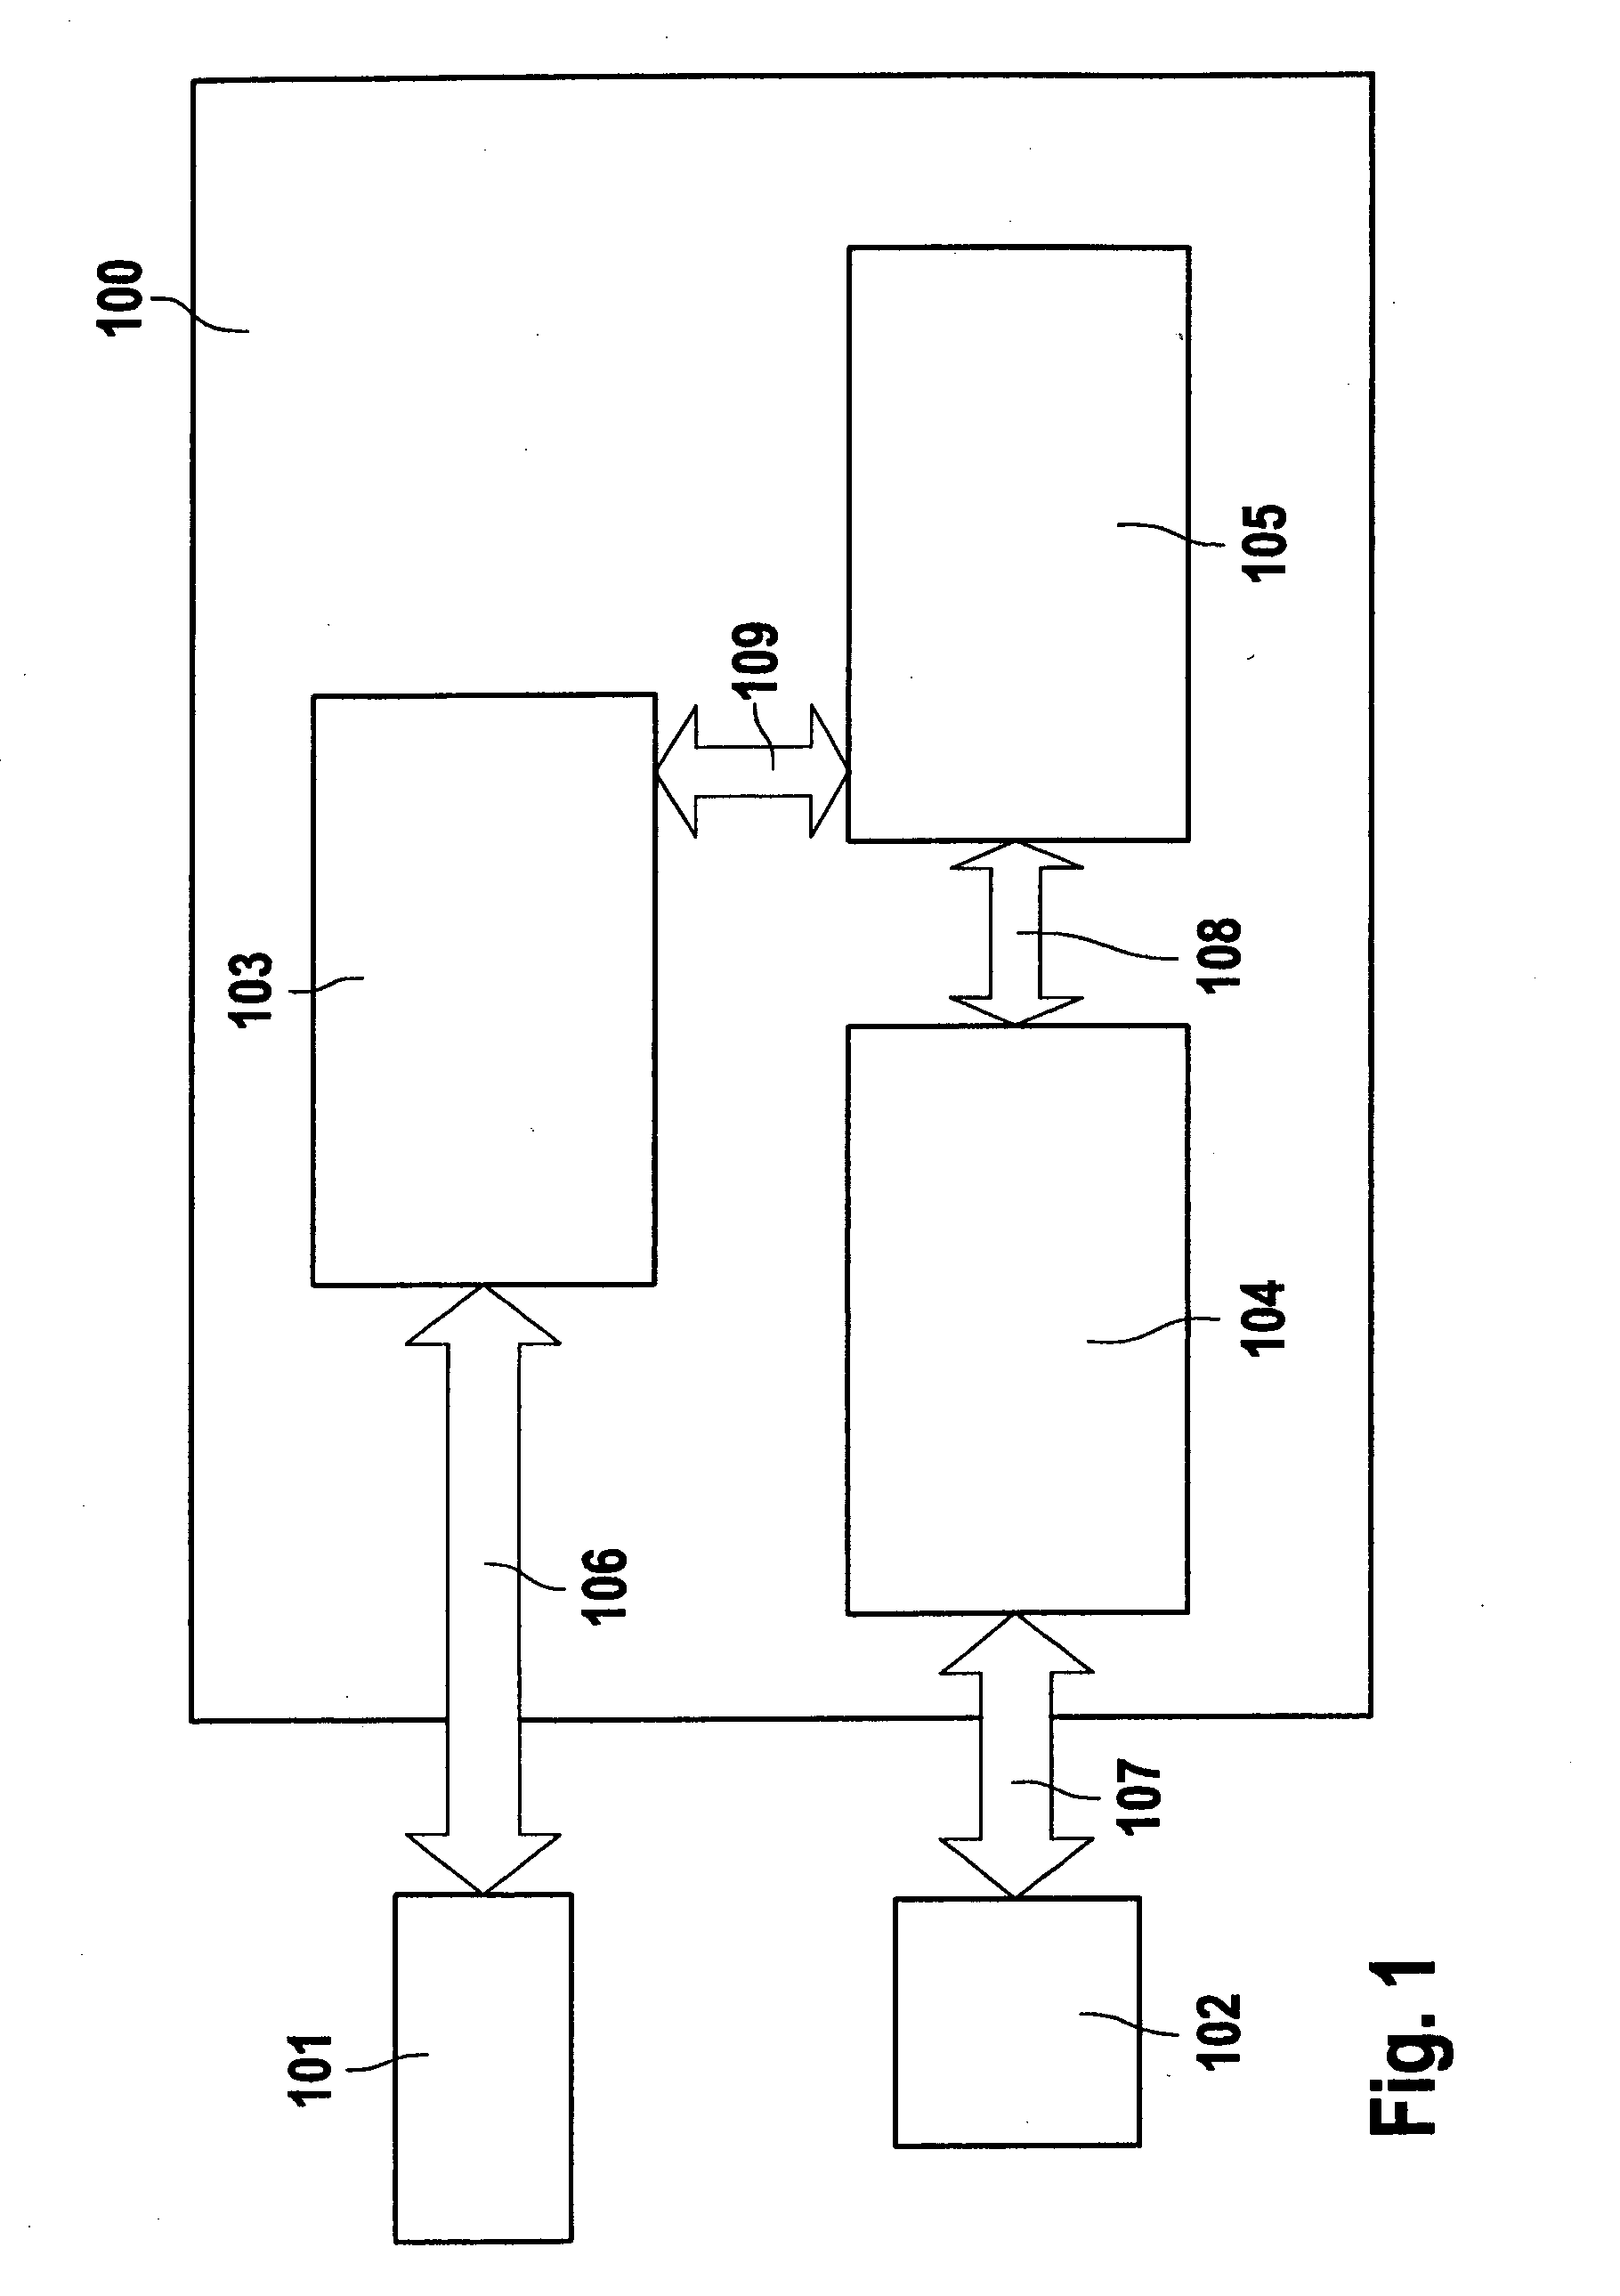 Subscriber and Communication Controller of a communication System and Method for Implementing a Gateway Functionality in a Subscriber of a Communication System